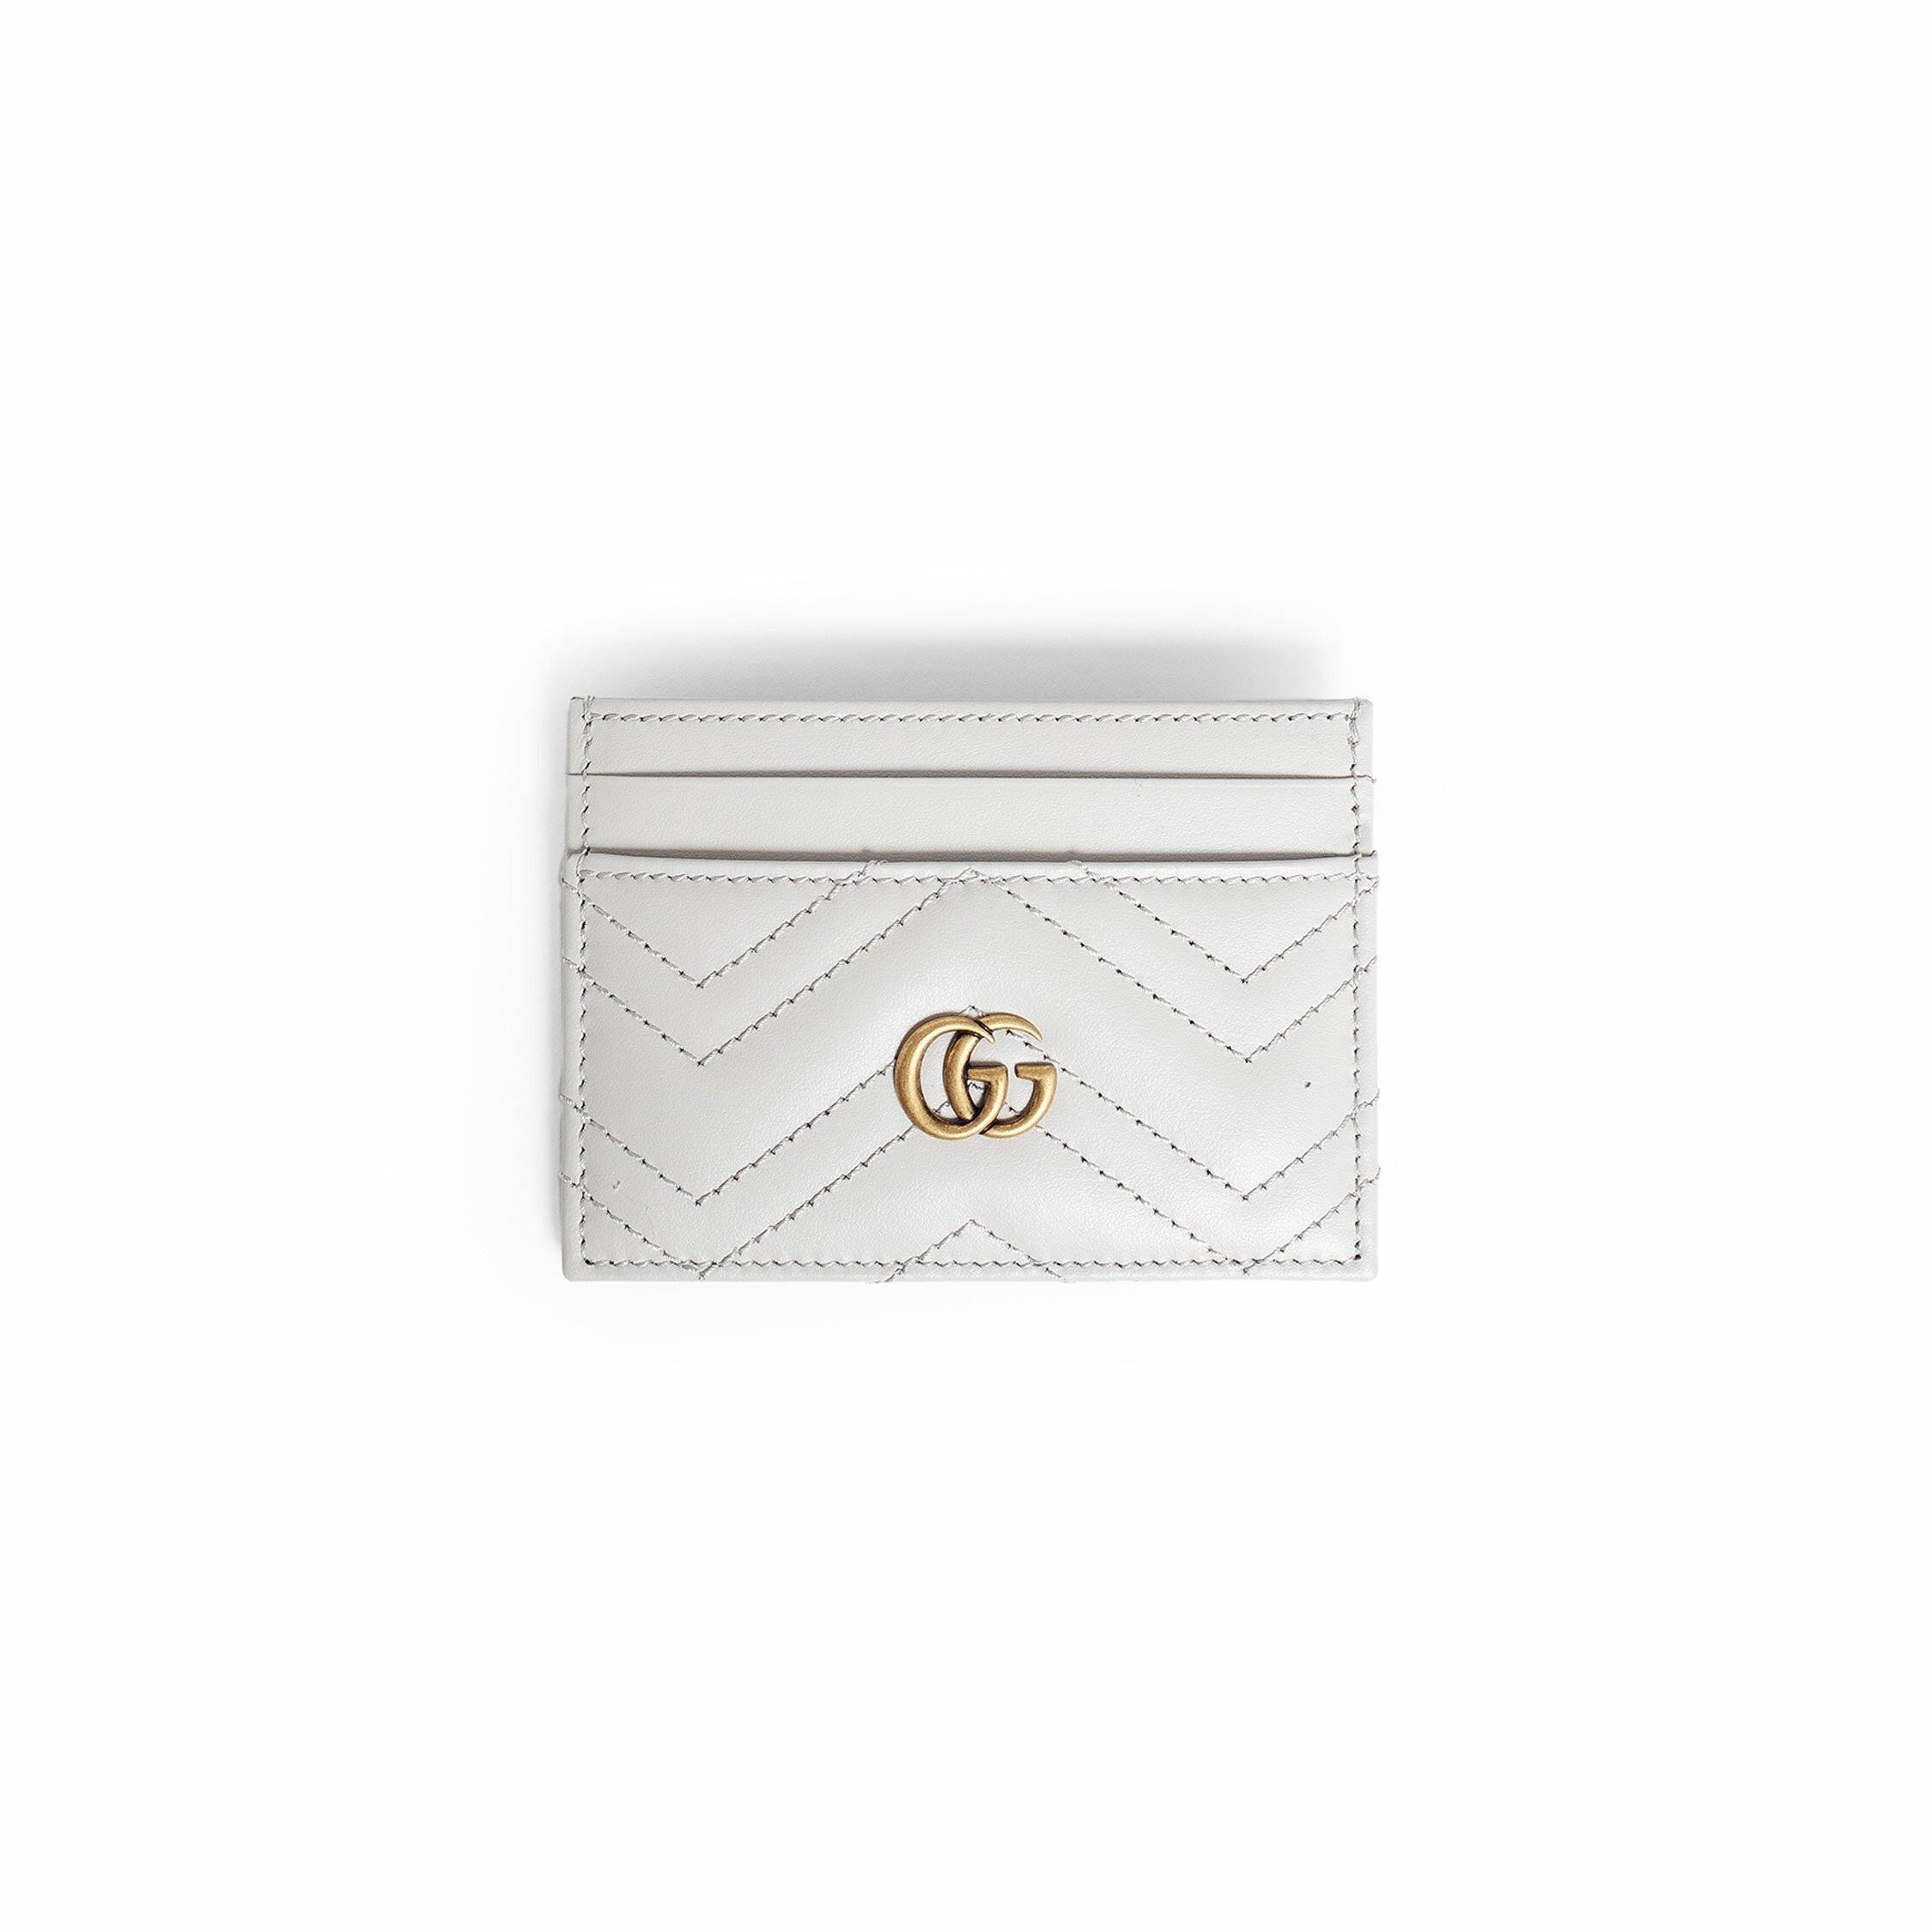 GUCCI WOMAN GREY WALLETS & CARDHOLDERS by GUCCI